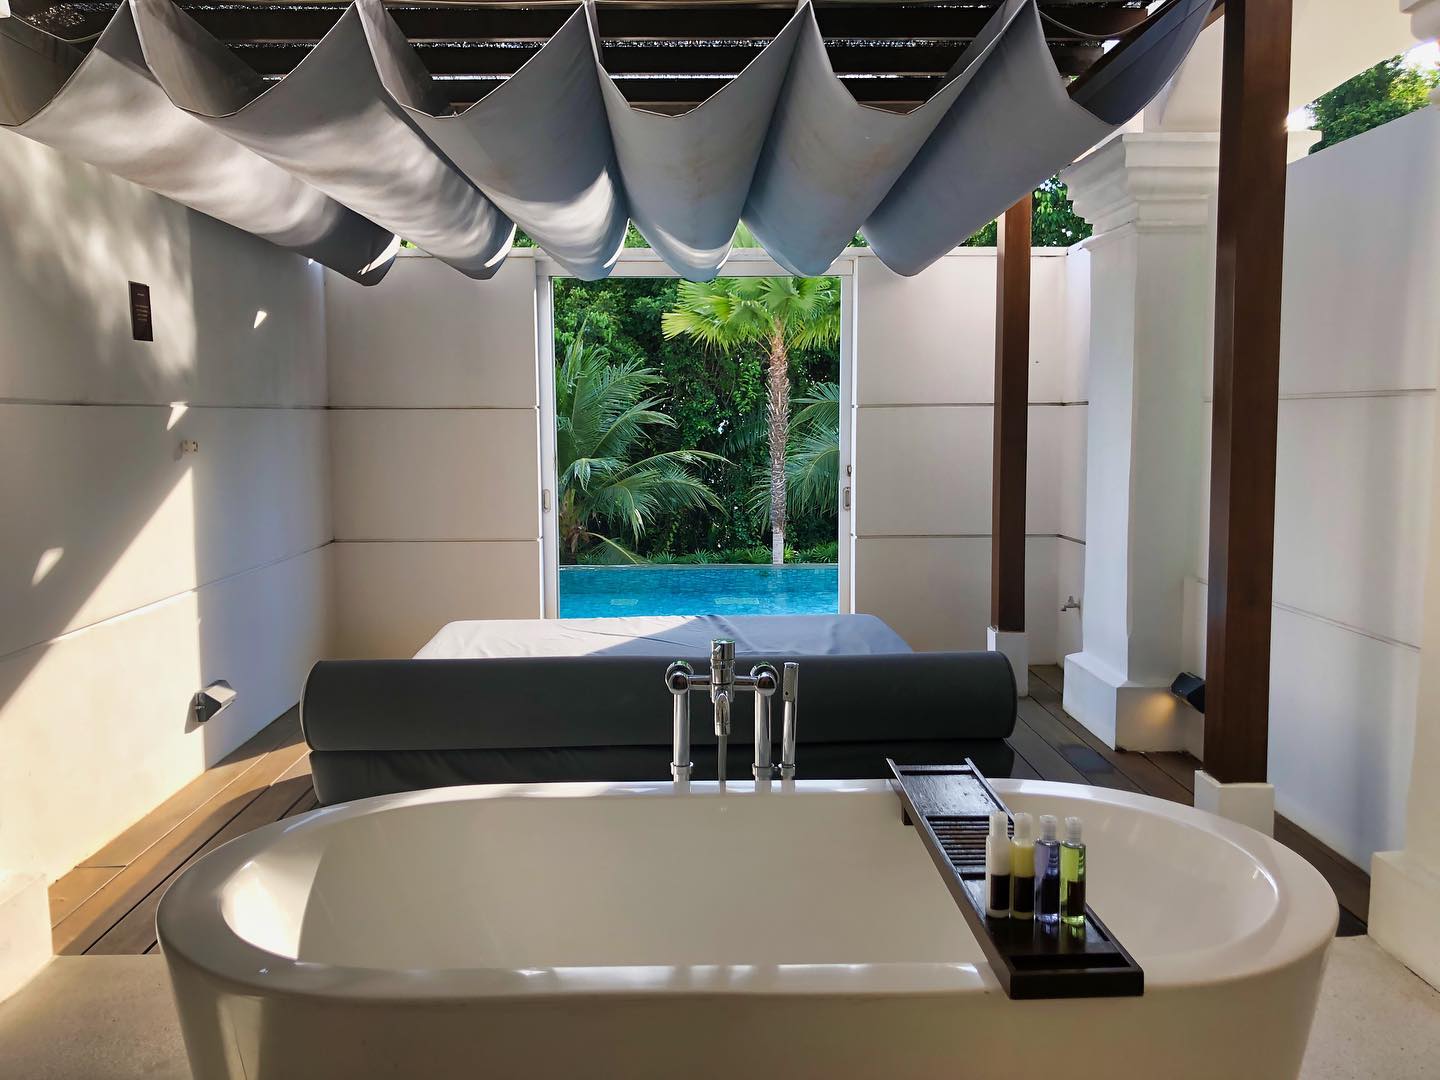 Hotel suites in Singapore - Couple suite's private terrace with hot tub